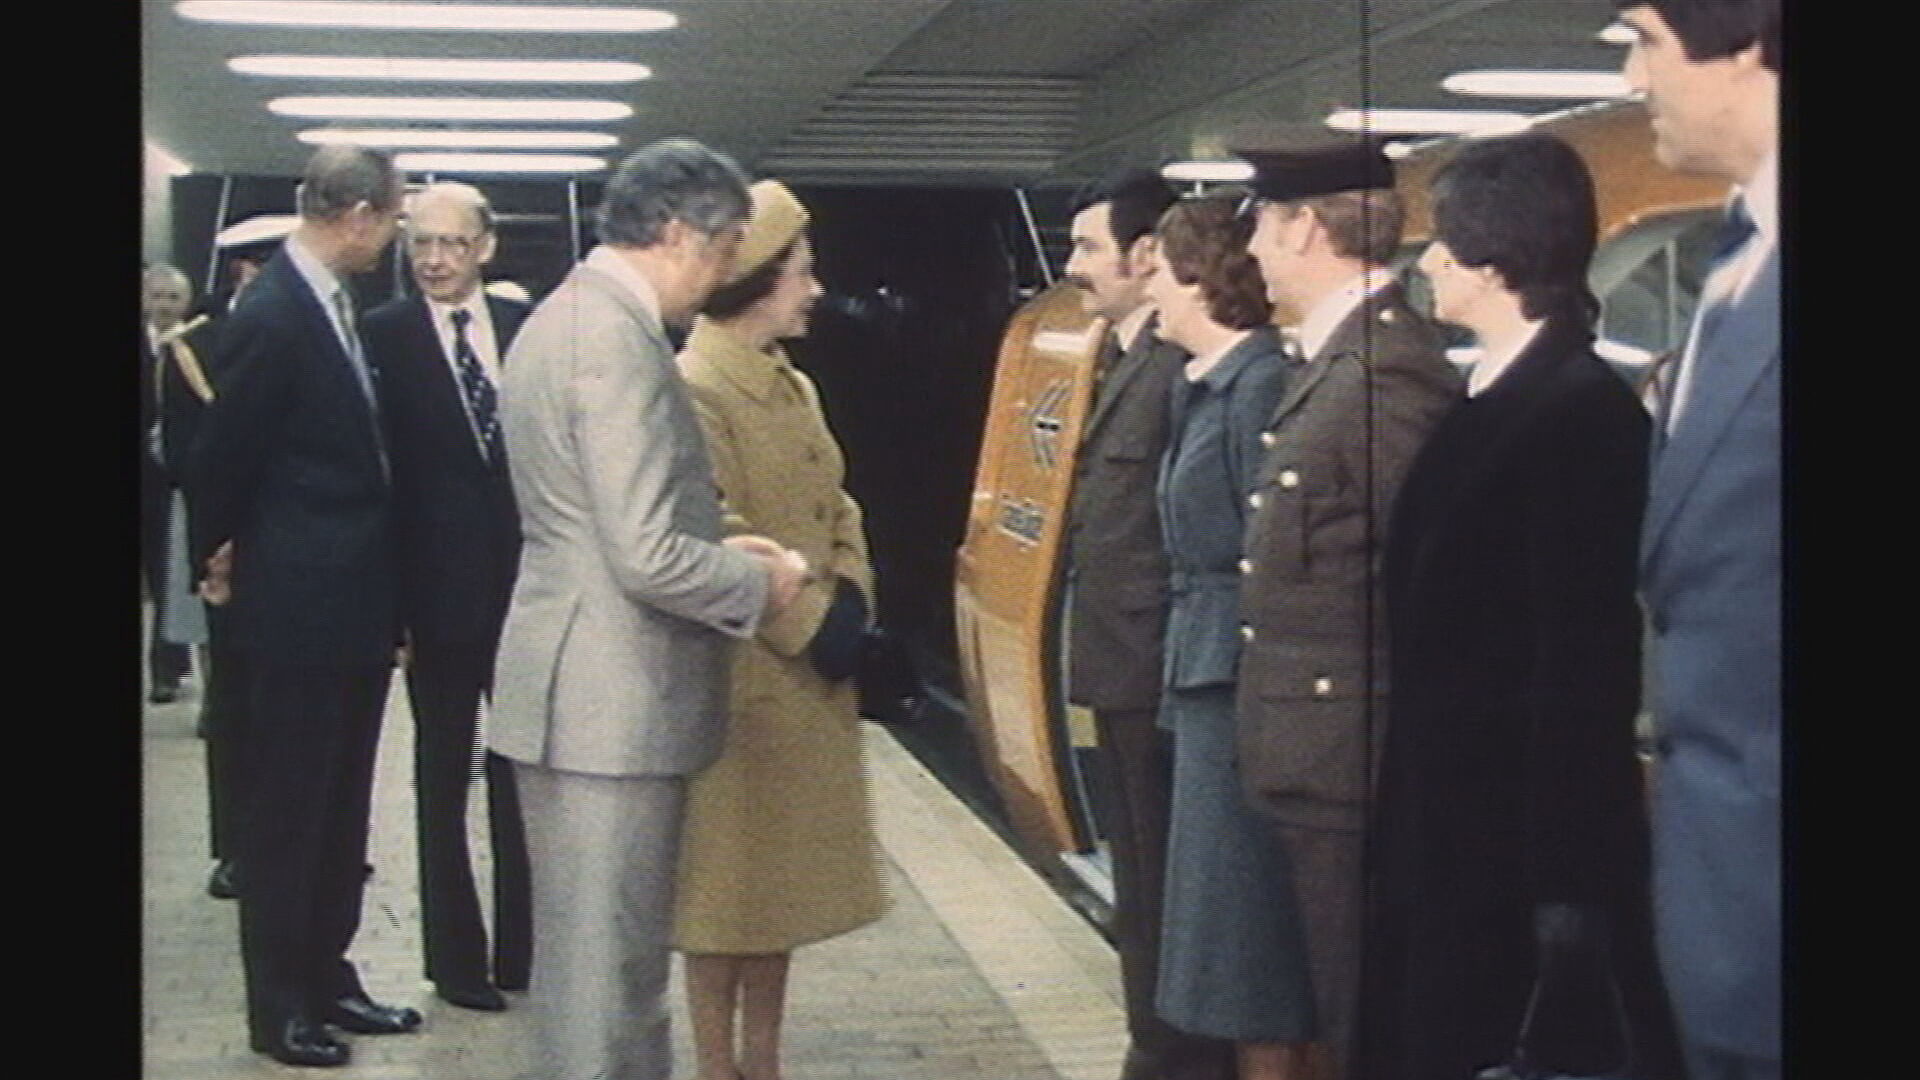 Queen Elizabeth II officially reopened the Glasgow Subway in 1979